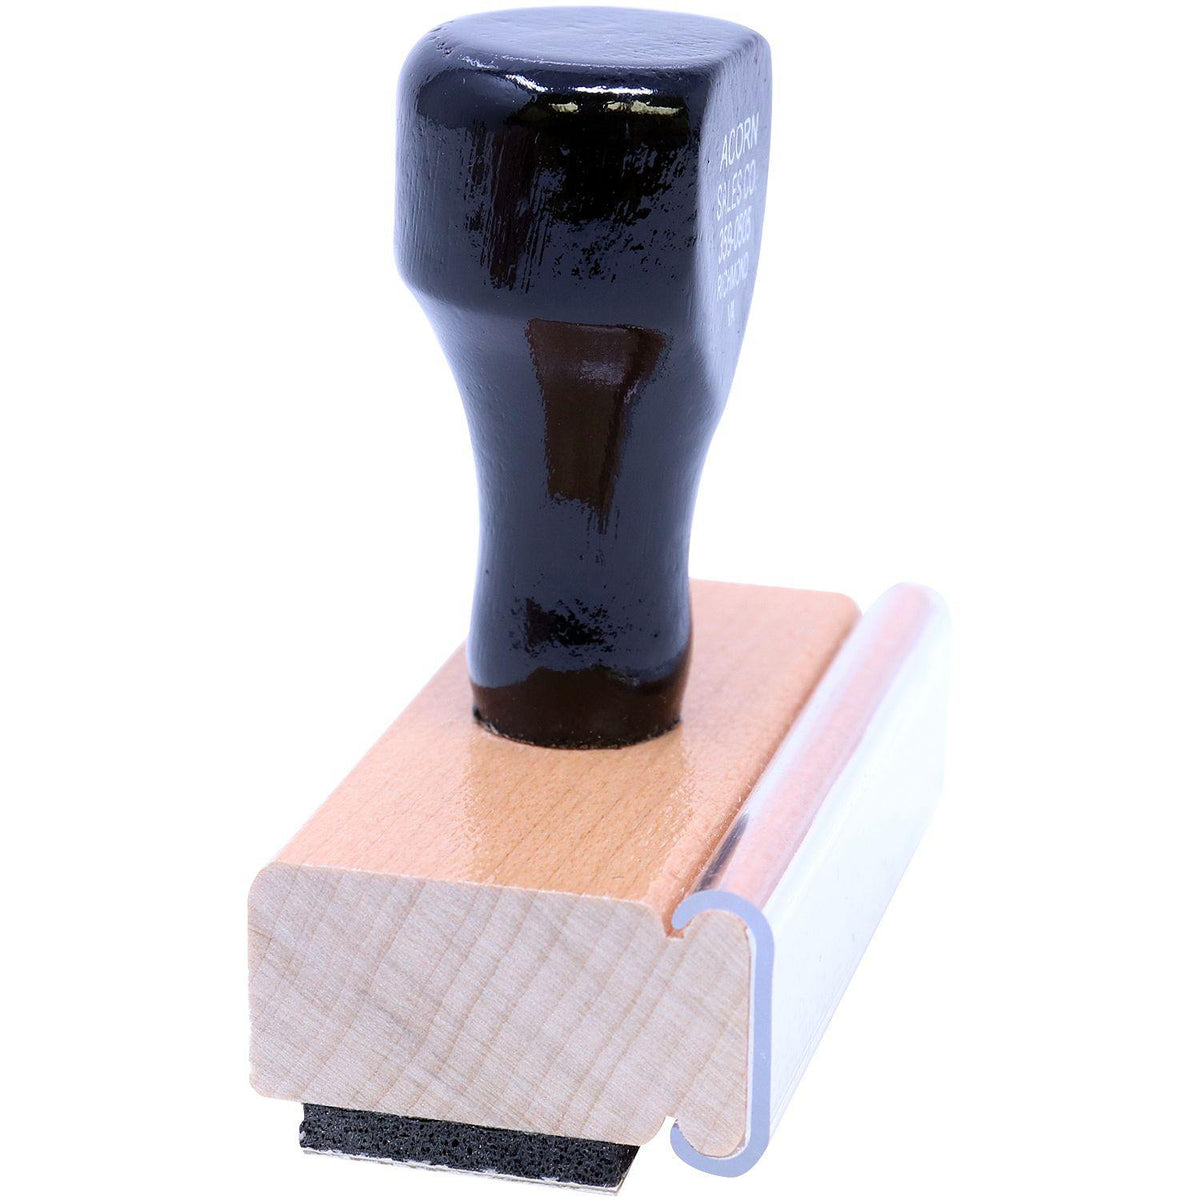 Side View of Times Faxed Rubber Stamp at an Angle